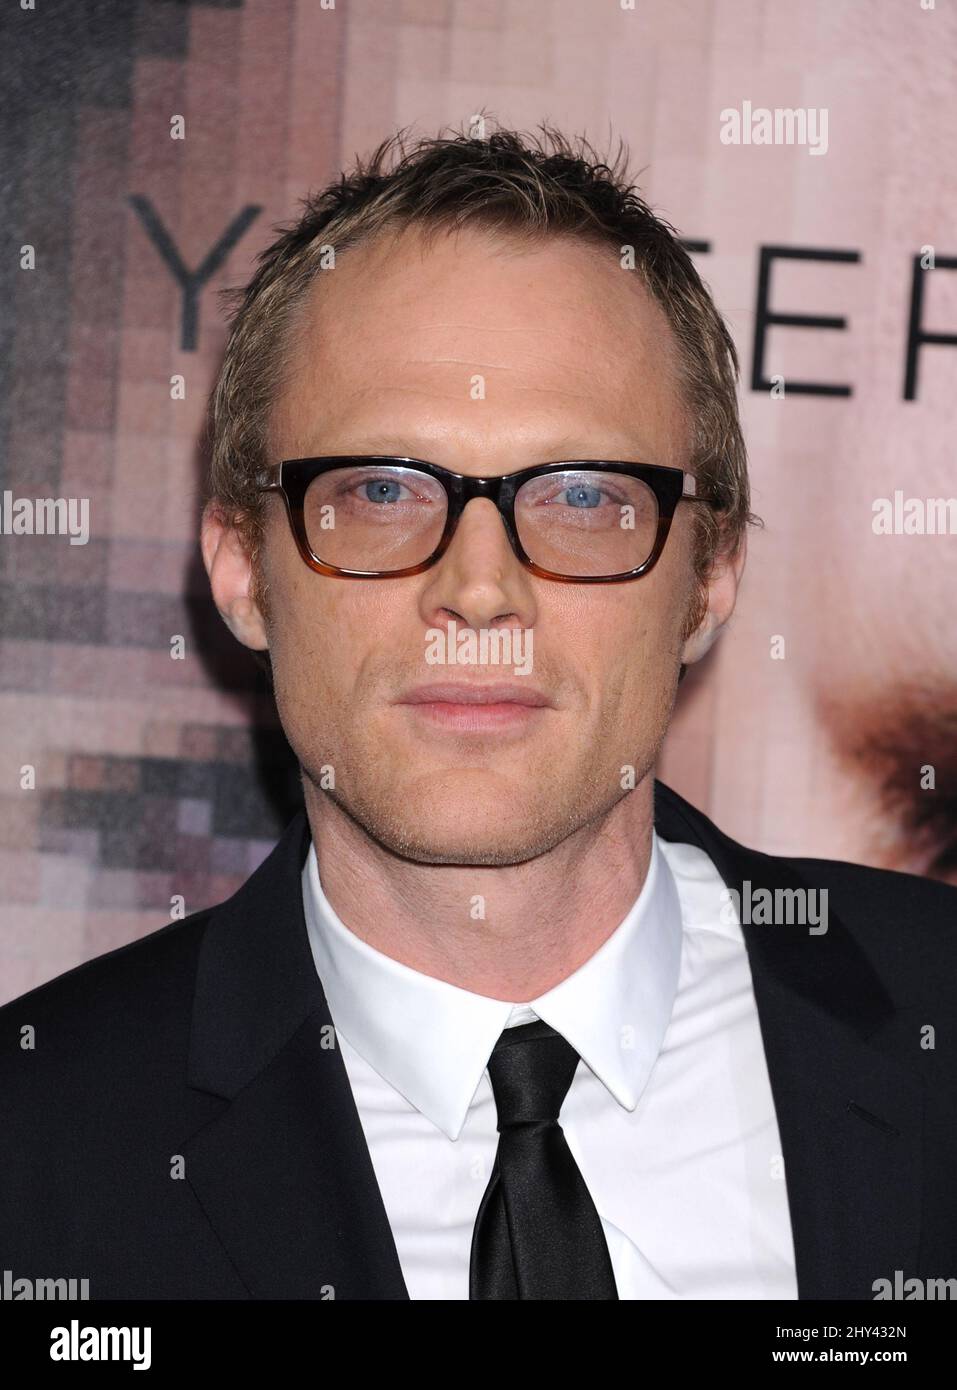 Paul Bettany arrives at the LA Premiere Of 'Transcendence' on Thursday, April 10, 2014, in Los Angeles. Stock Photo